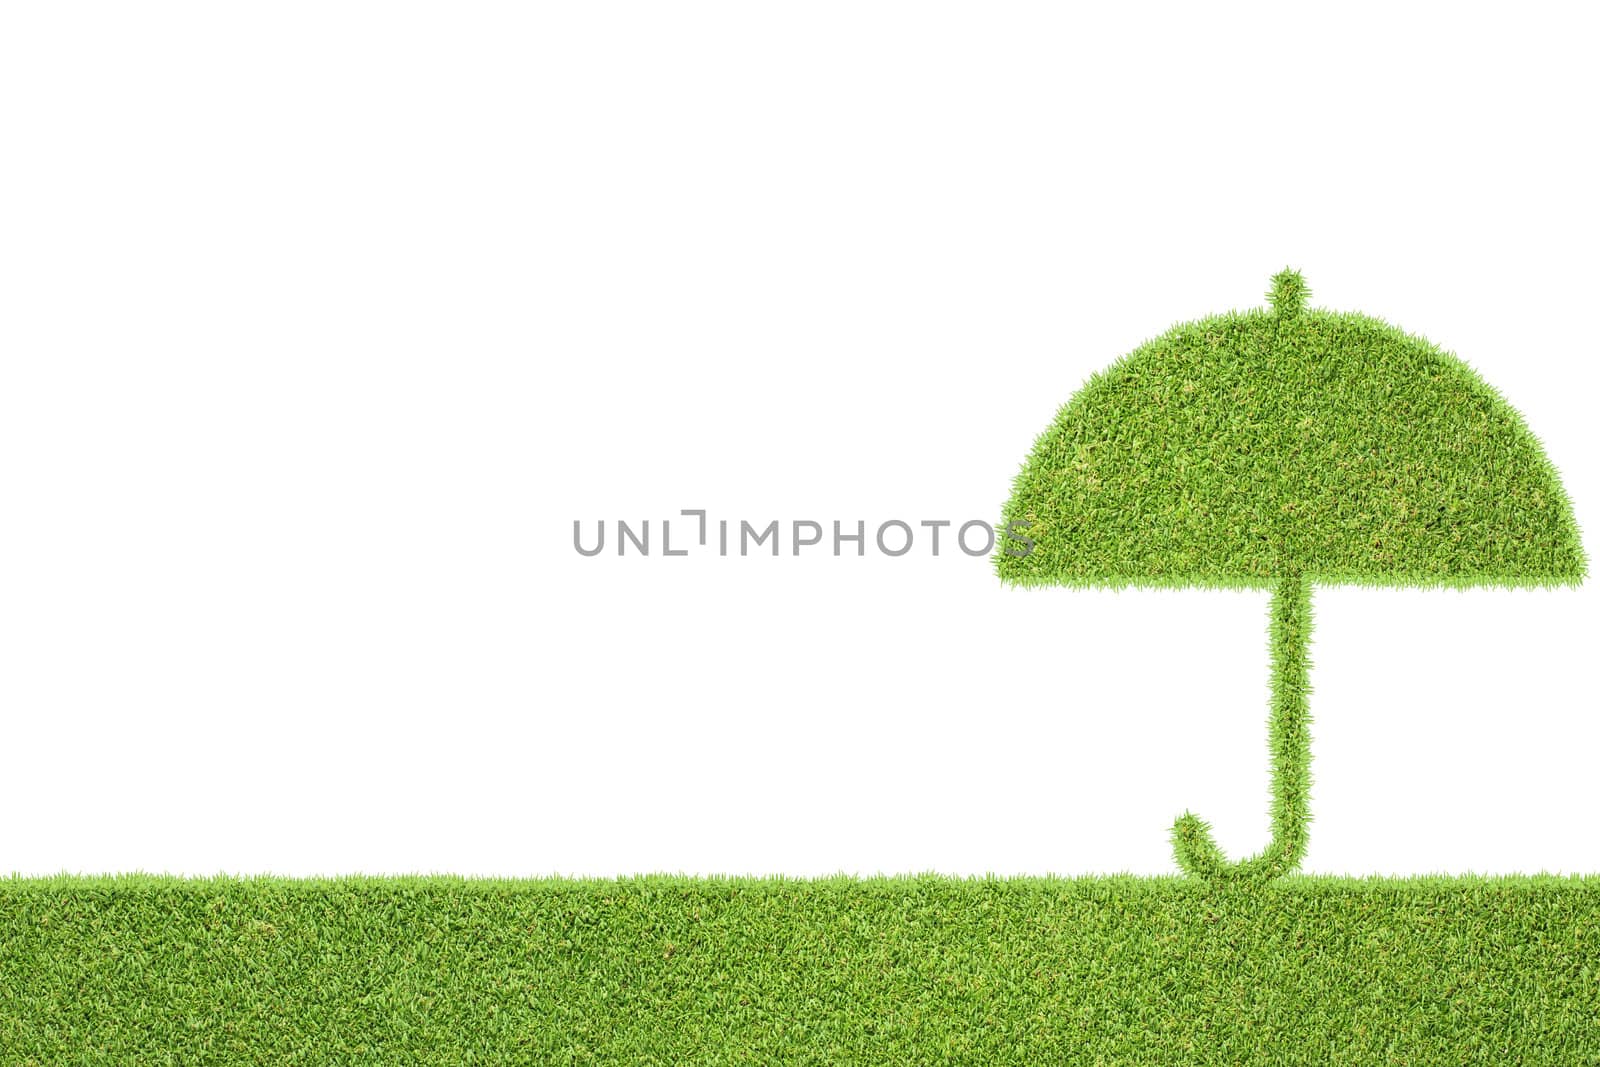 Umbrella of green grass texture and  background